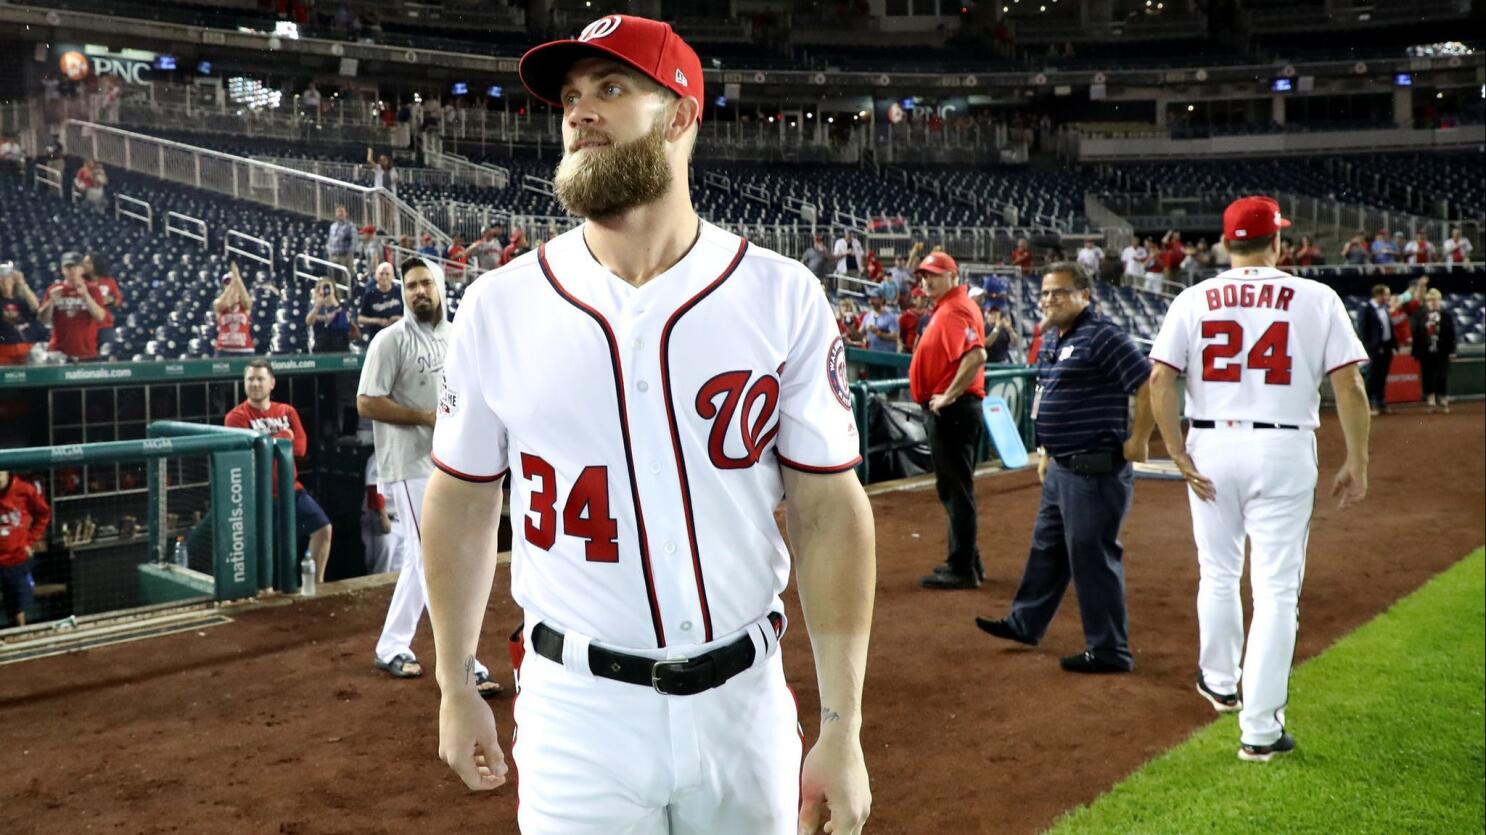 Quoted: Bryce Harper on All-Star selection - The Washington Post